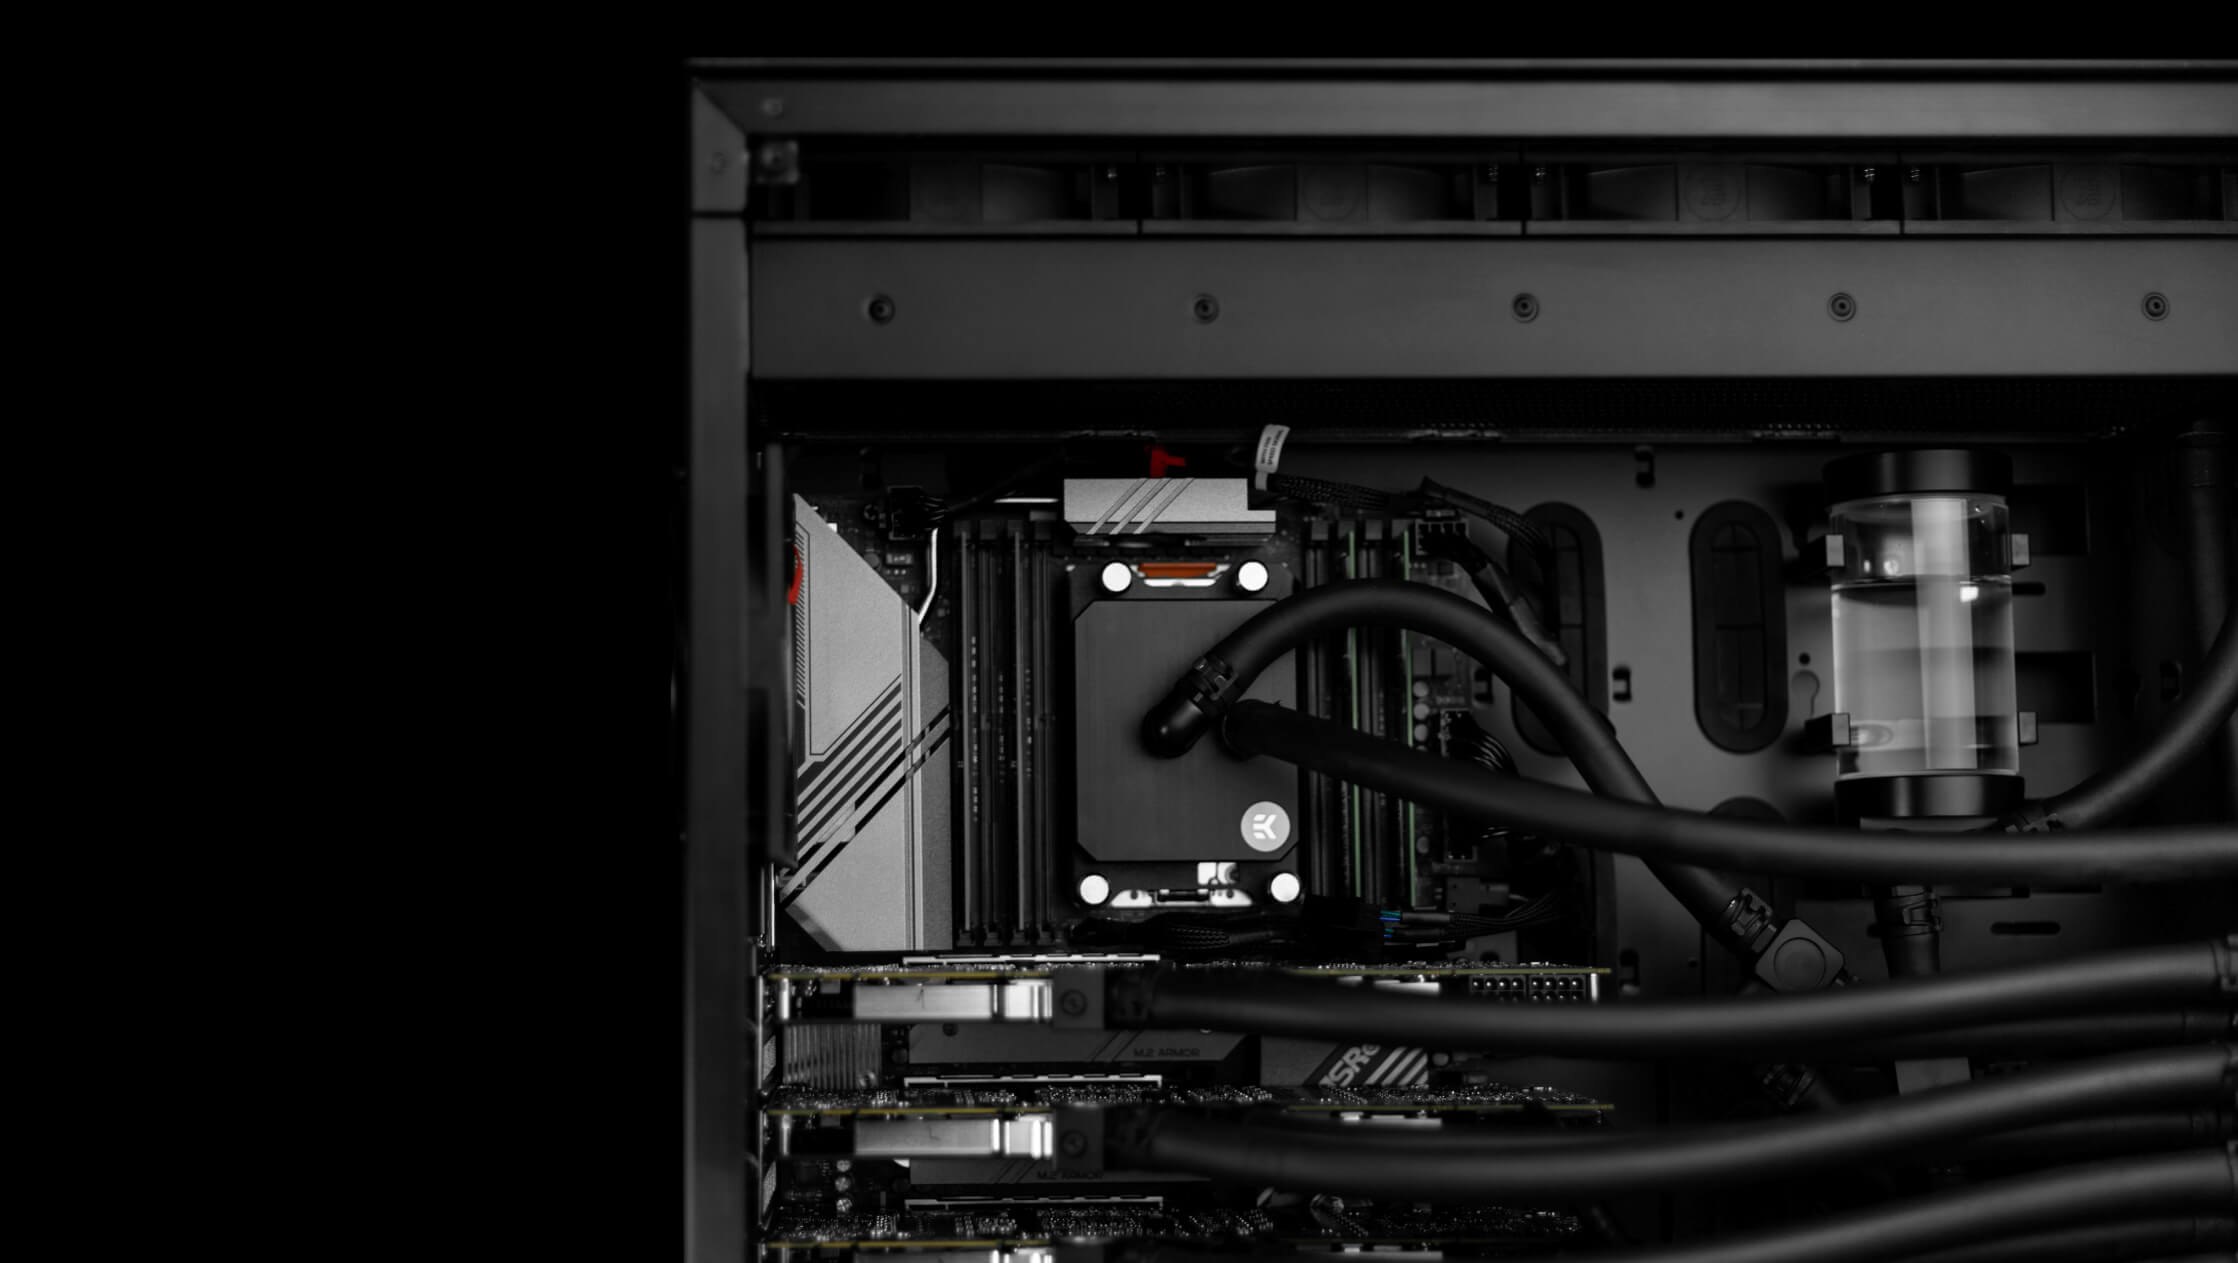 EK-Fluid Works Studio Series S5000 workstation with multiple GPUs – the ideal system for Unreal Engine Virtual production